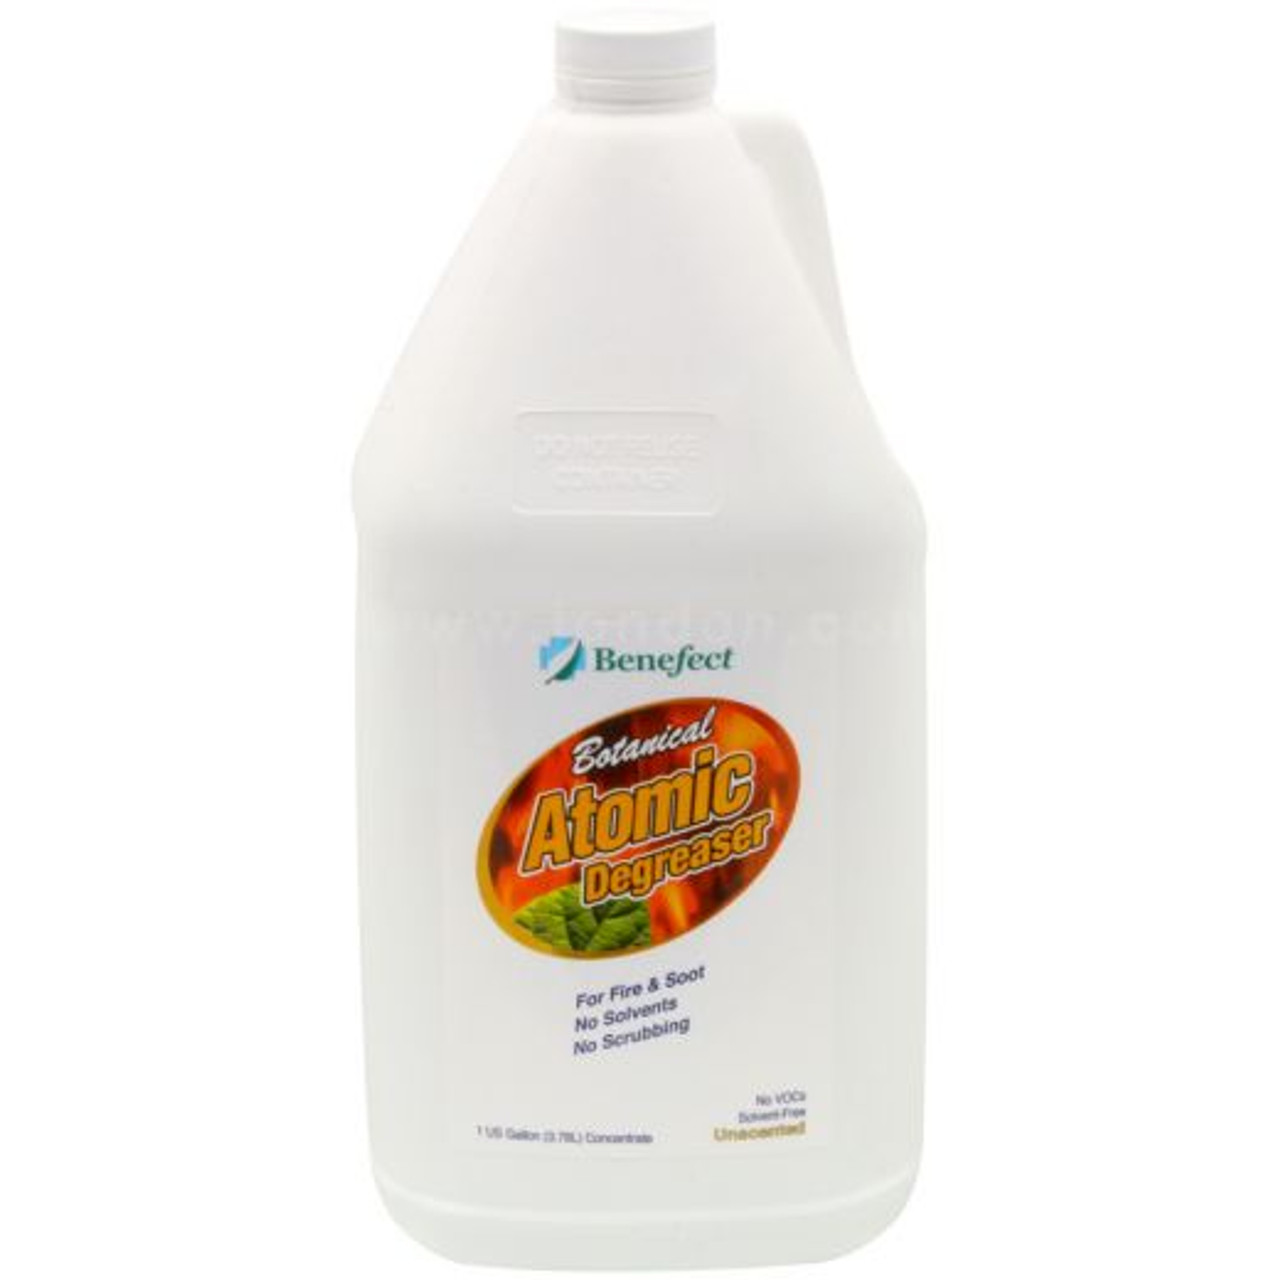 Benefect Atomic Degreases CASE of 4 gal.